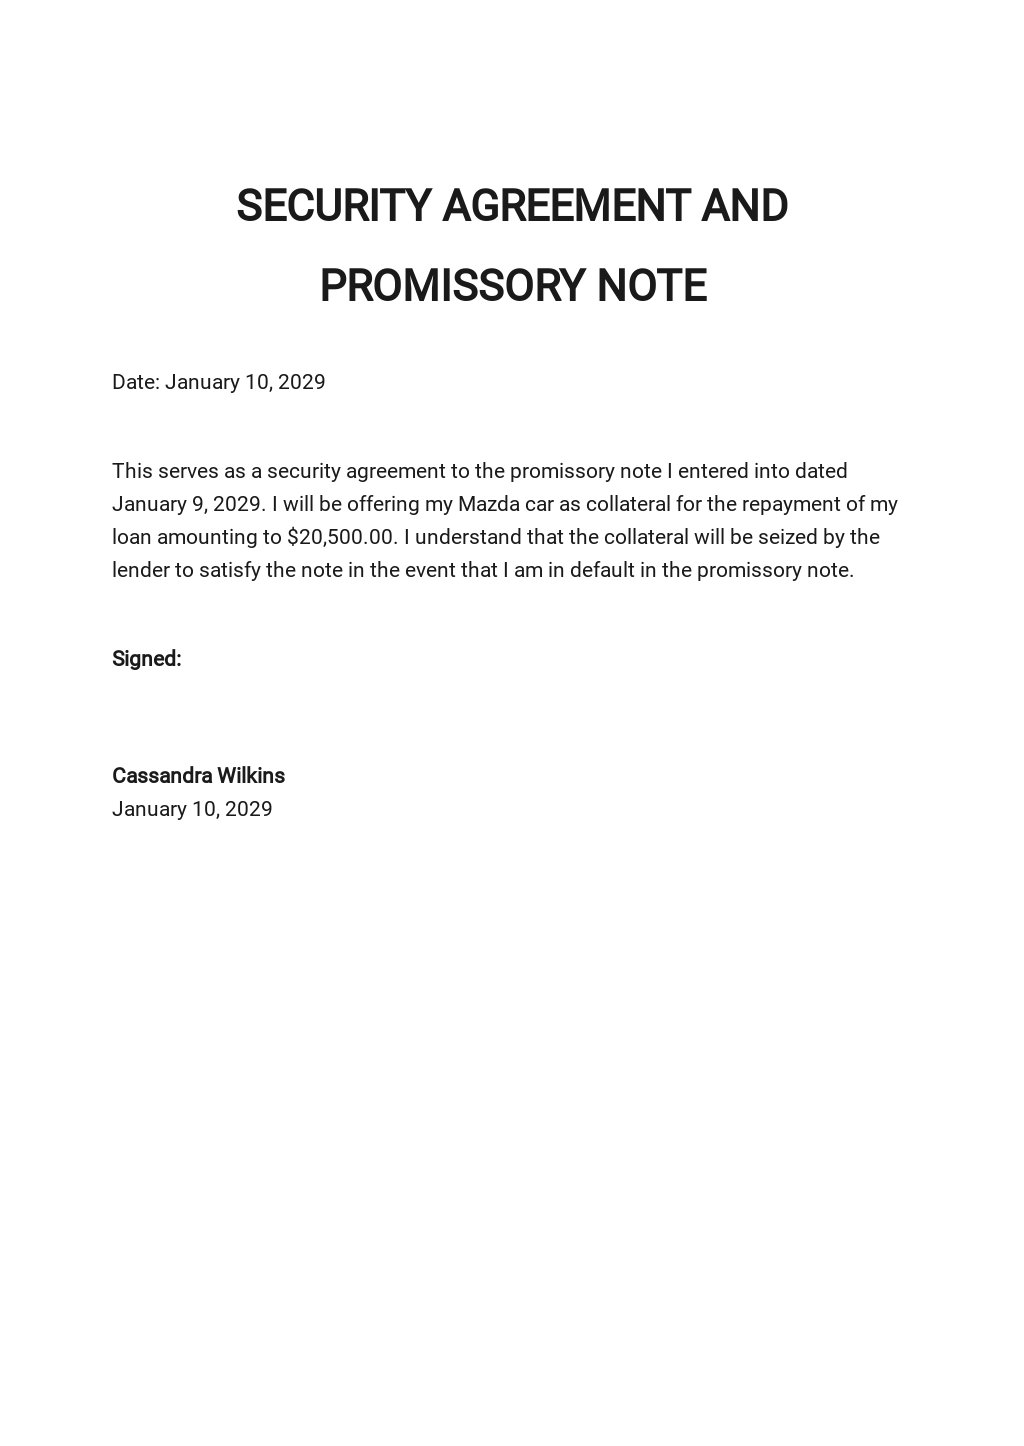 30+ Promissory Note Templates - Free Downloads  Template.net